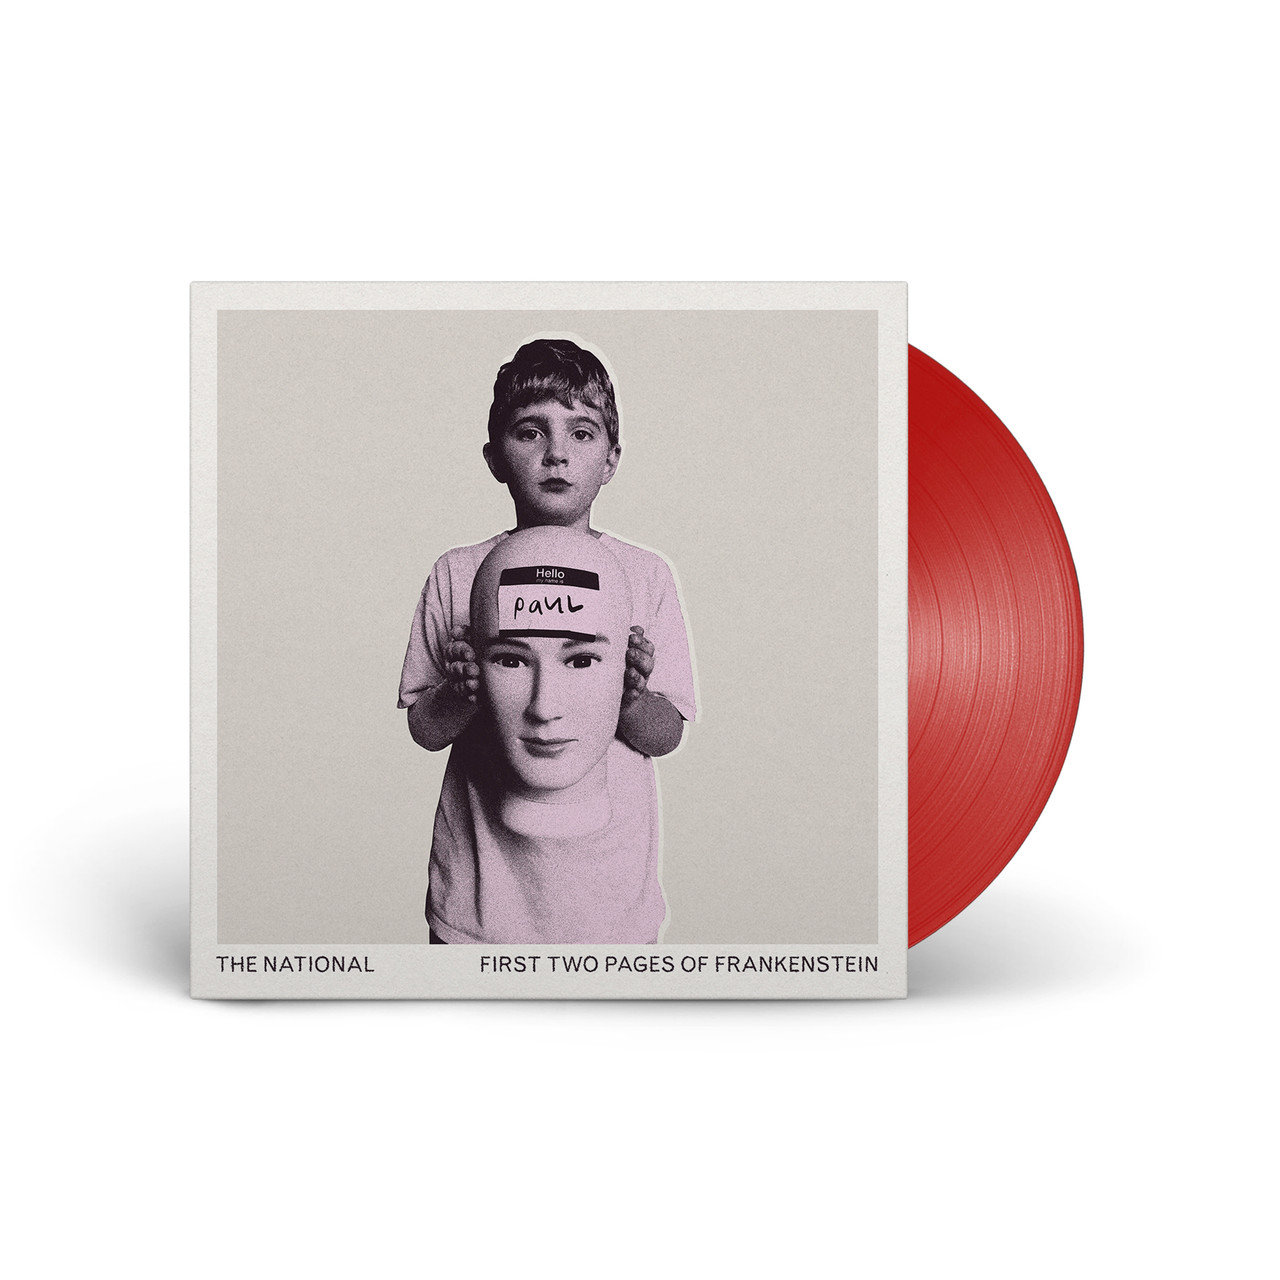 Limited Edition Red Vinyl